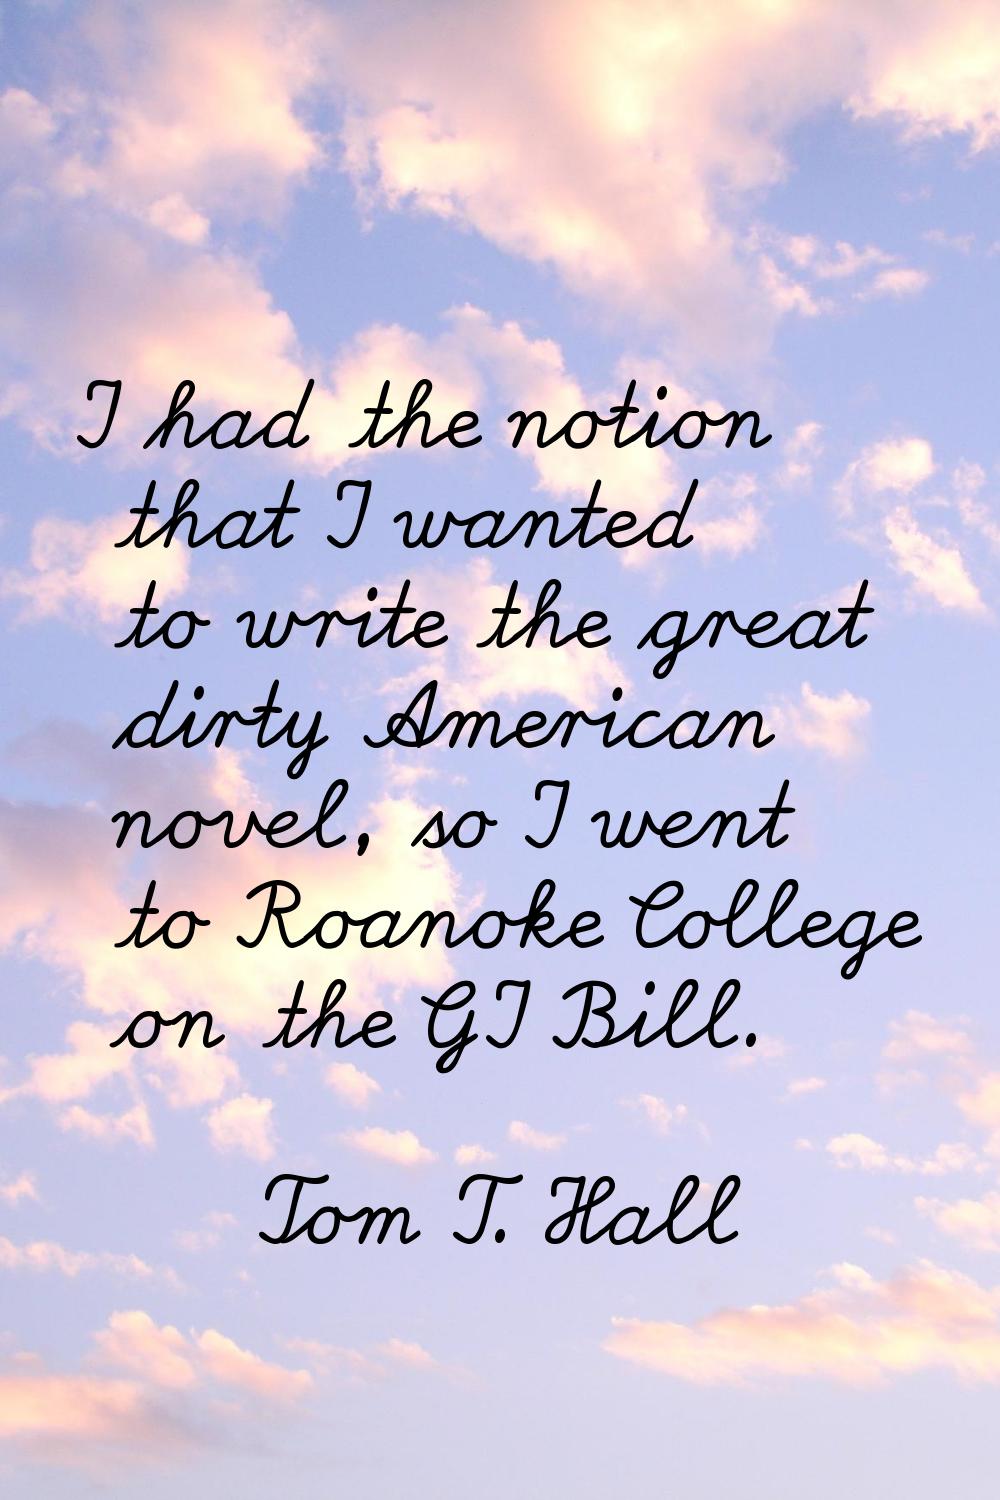 I had the notion that I wanted to write the great dirty American novel, so I went to Roanoke Colleg